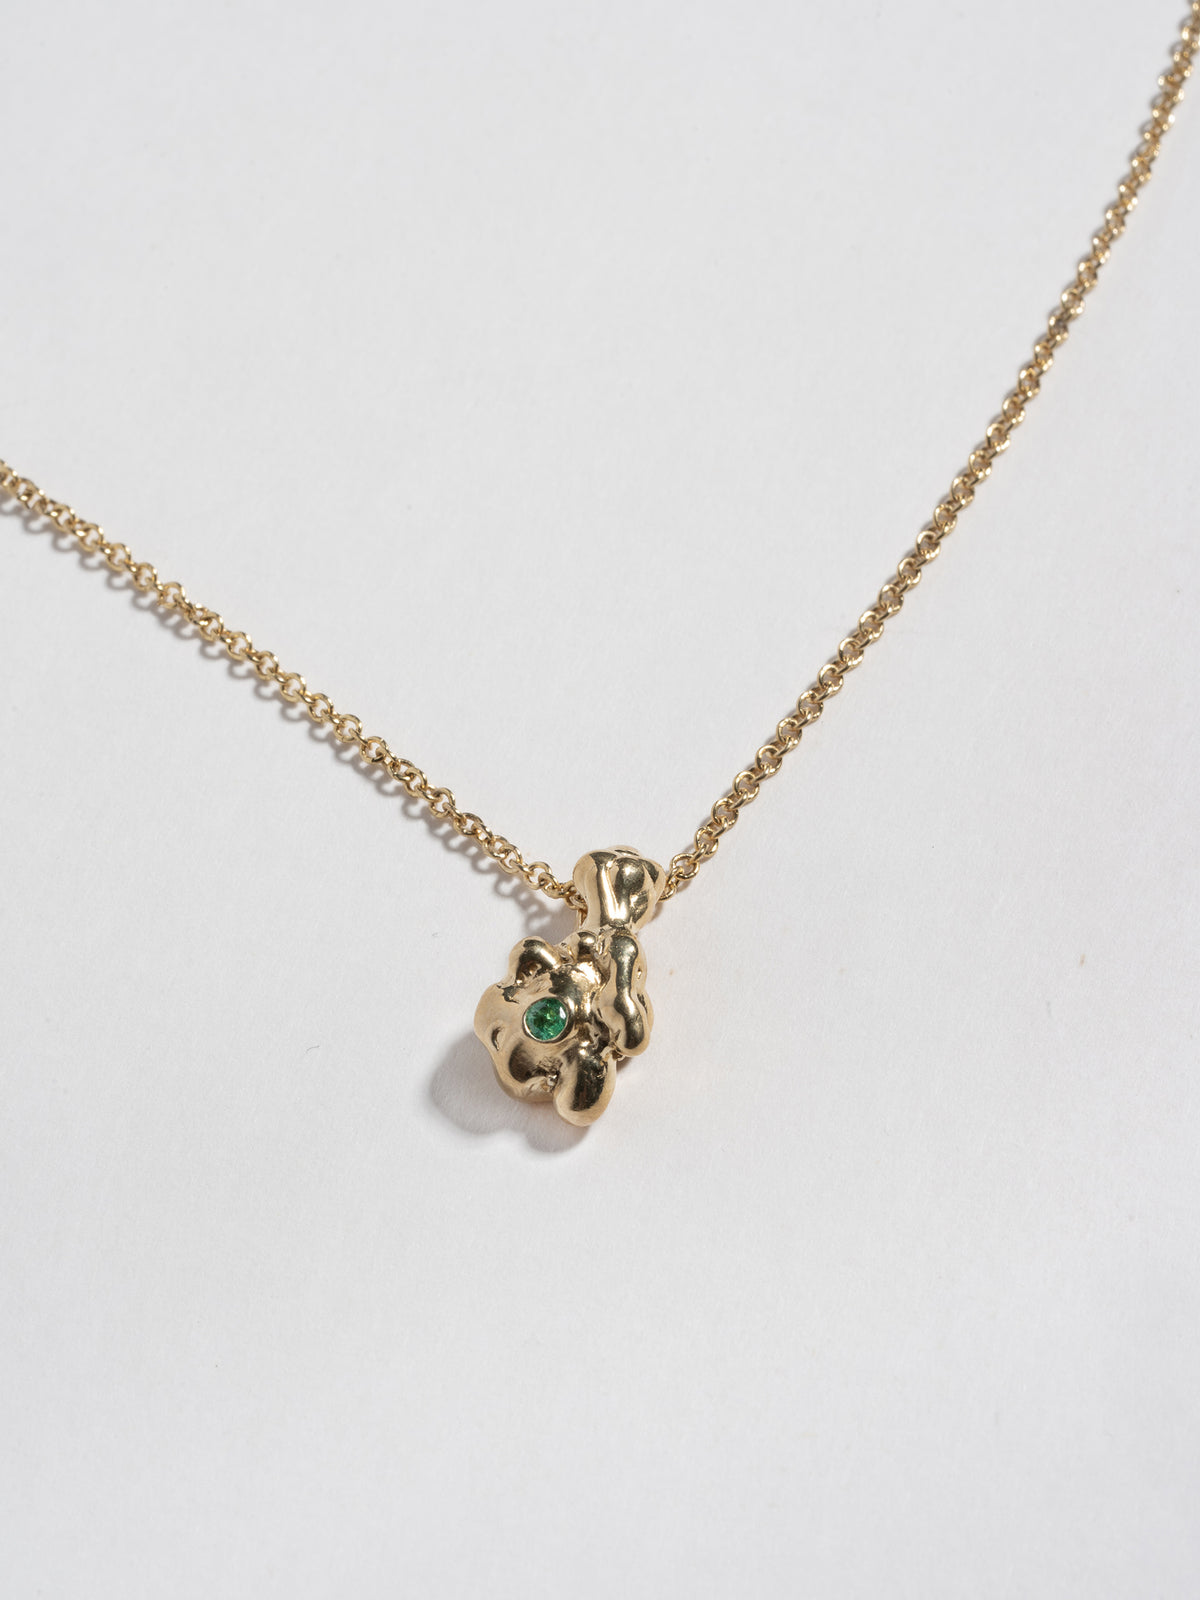 Close up image of 14k gold plated GOBBO Necklace pendant with emerald